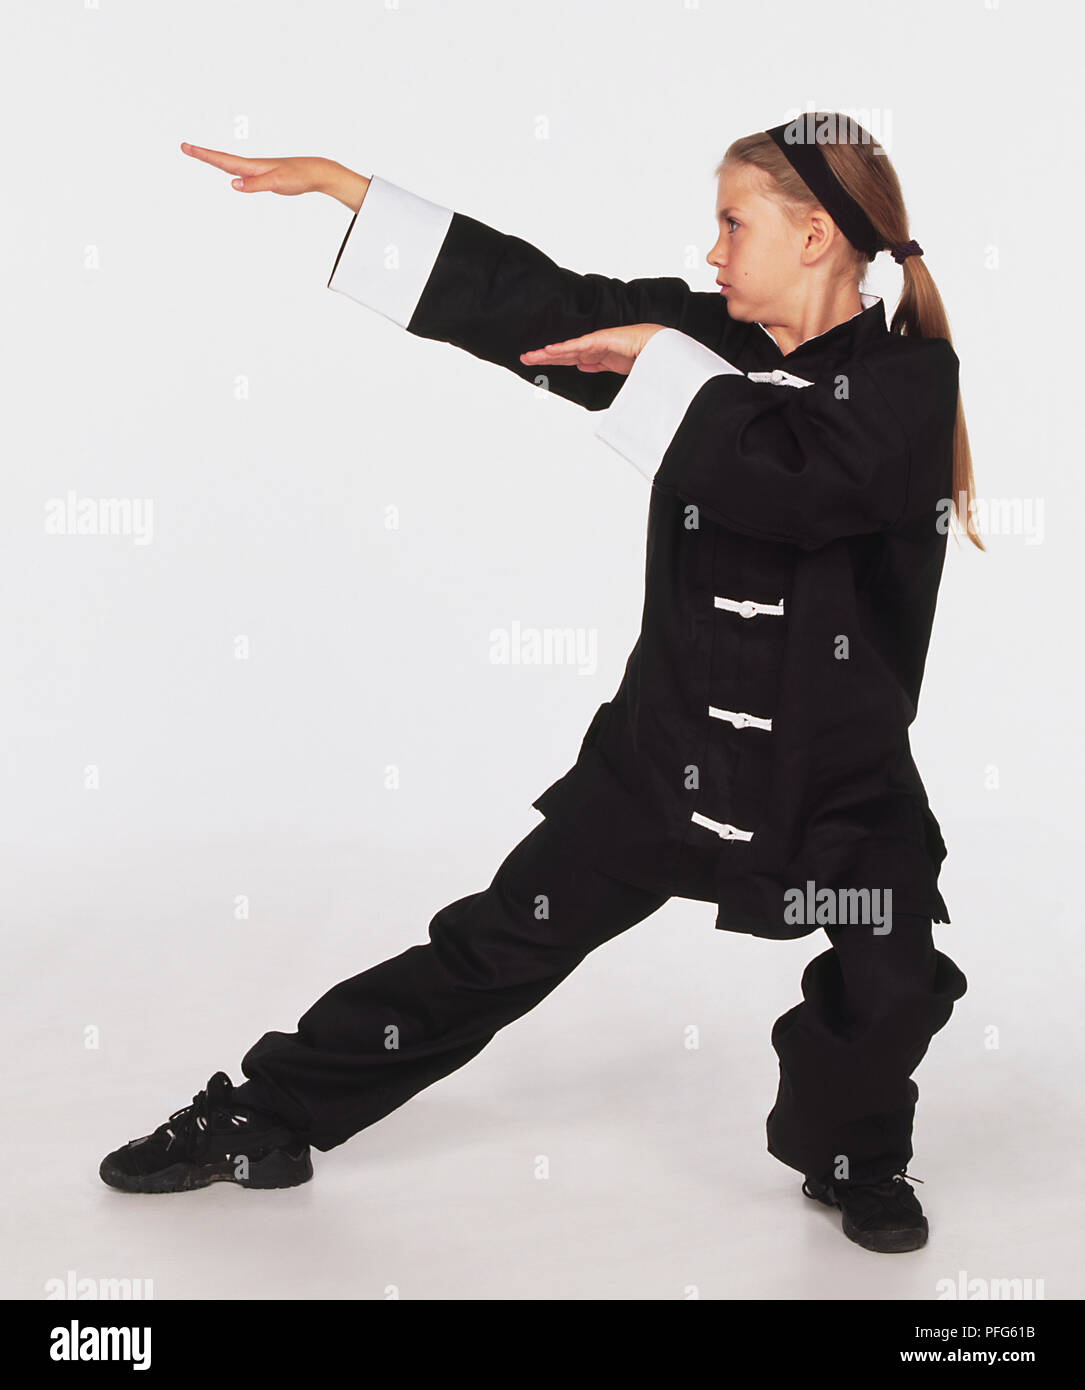 Young girl wearing martial arts uniform performing The snake stance. Stock Photo